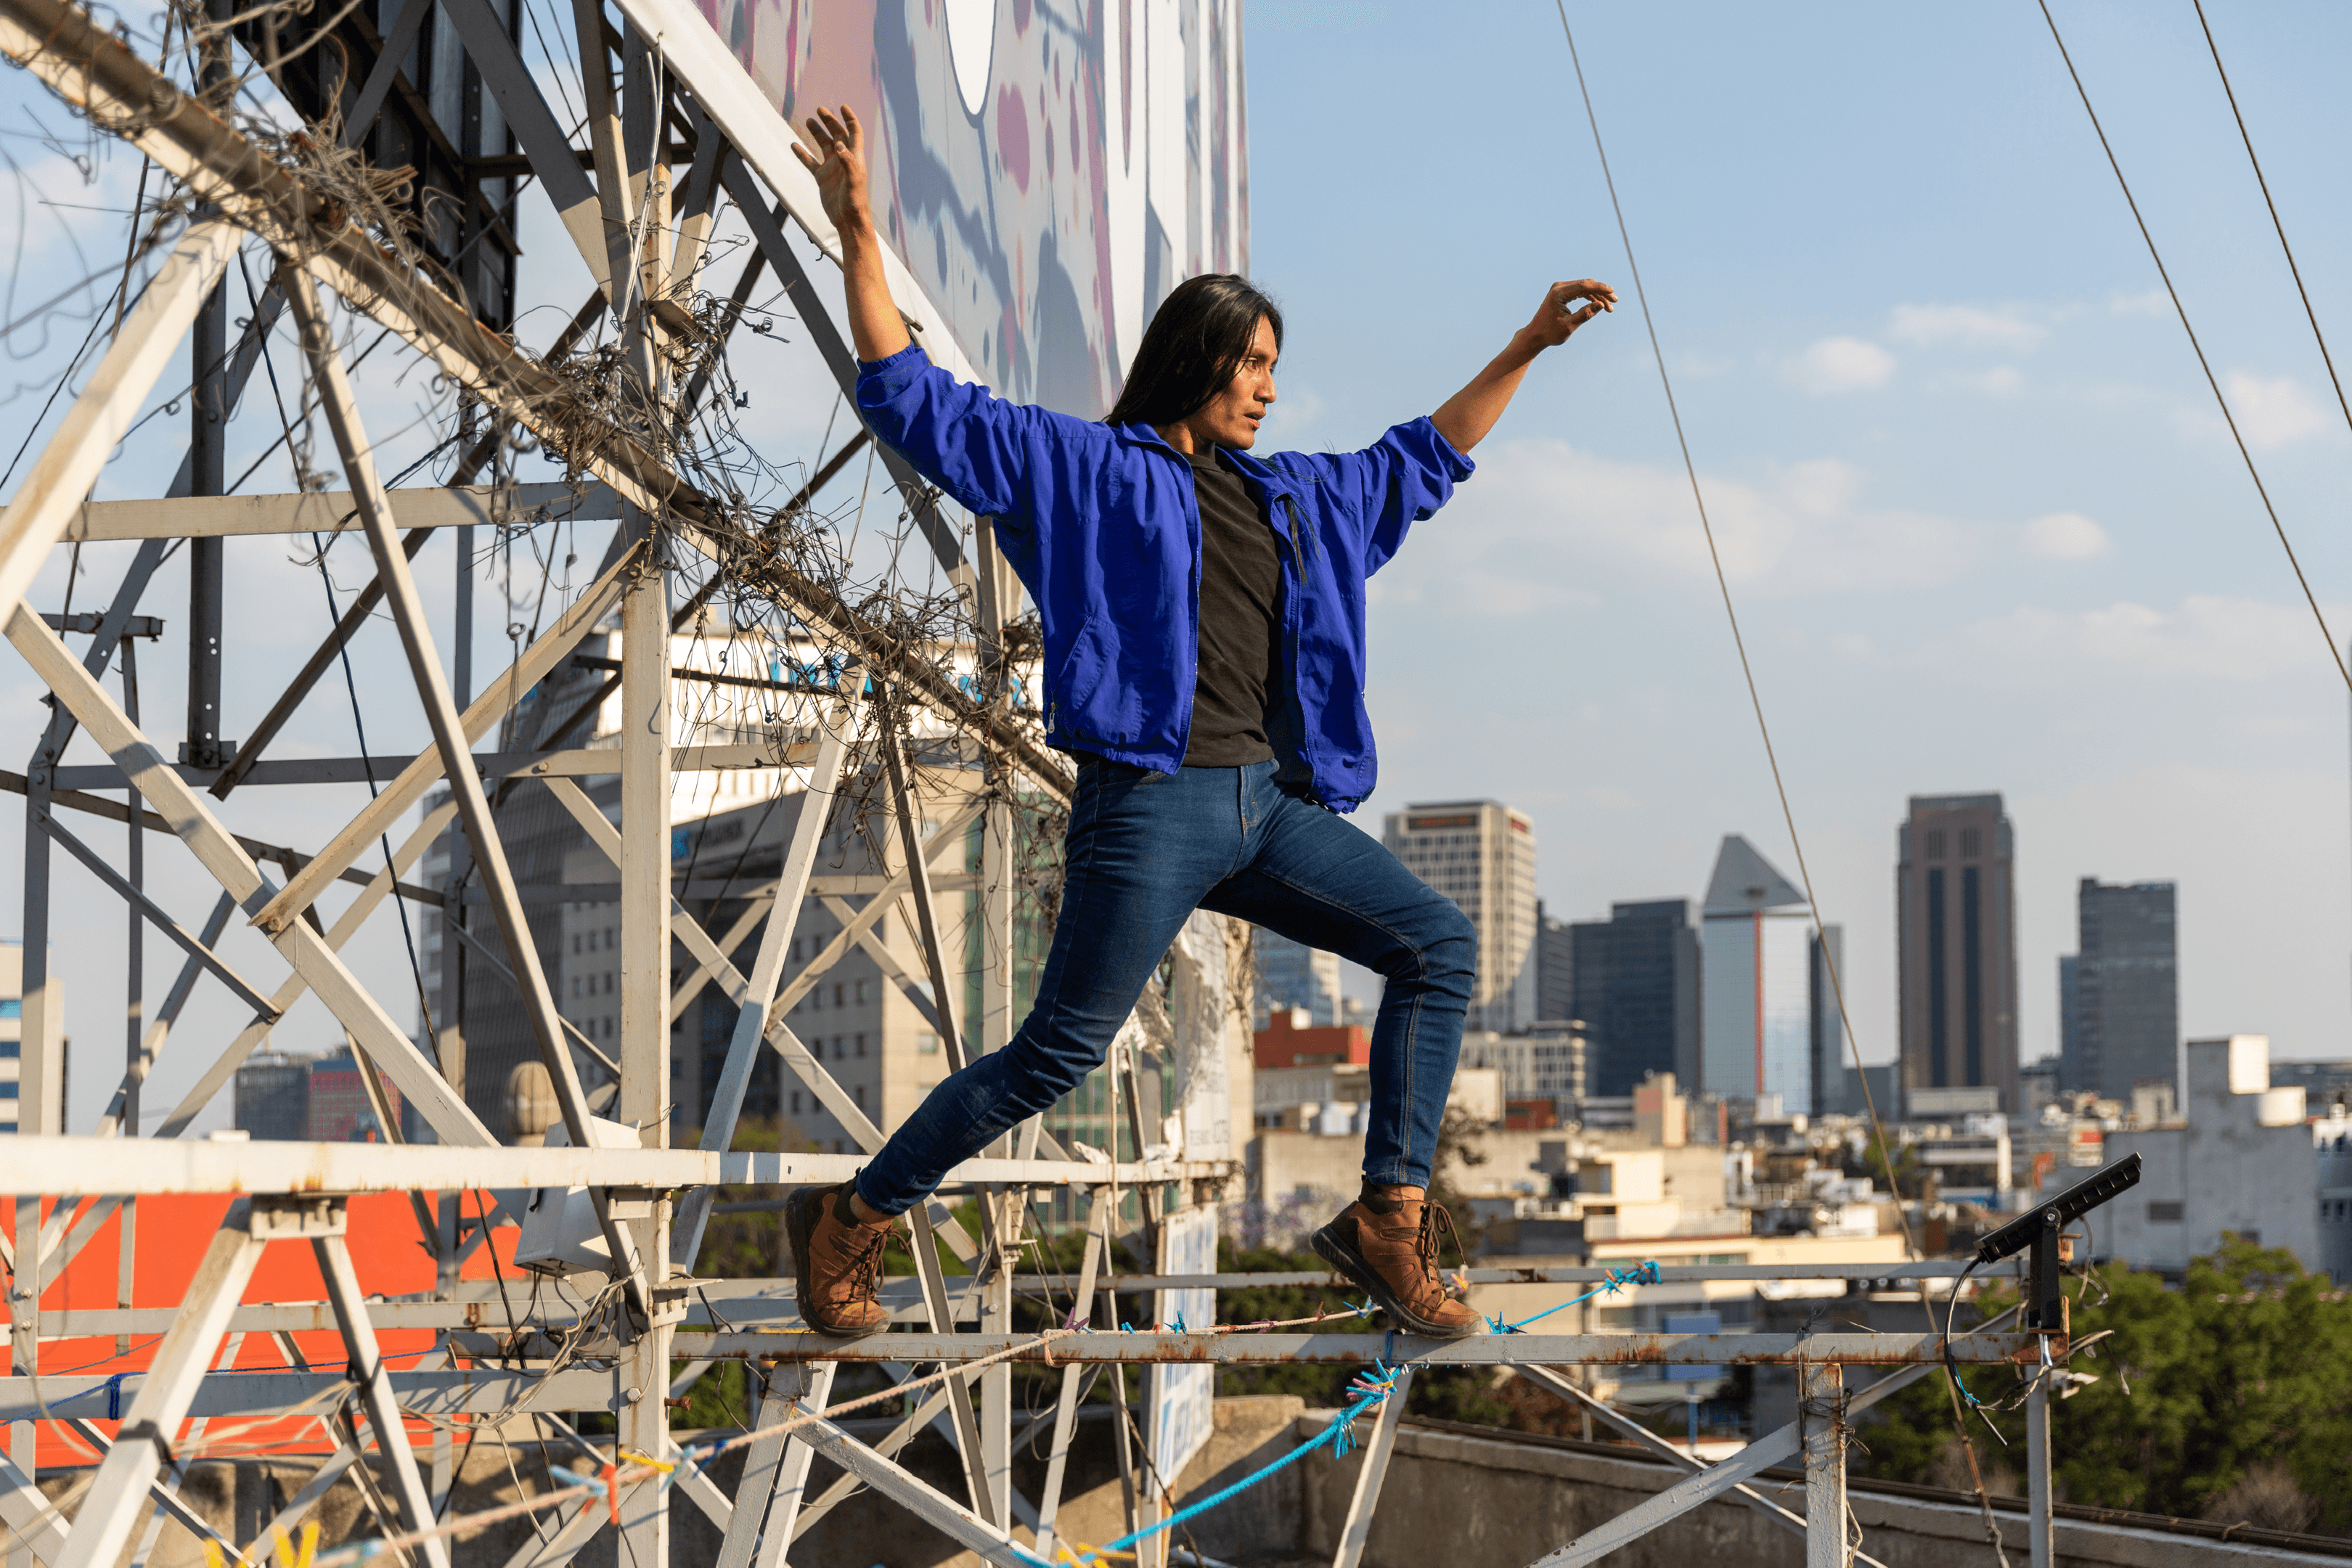 Dancers on Rooftops #105 - Jose (Mexico, 2022)